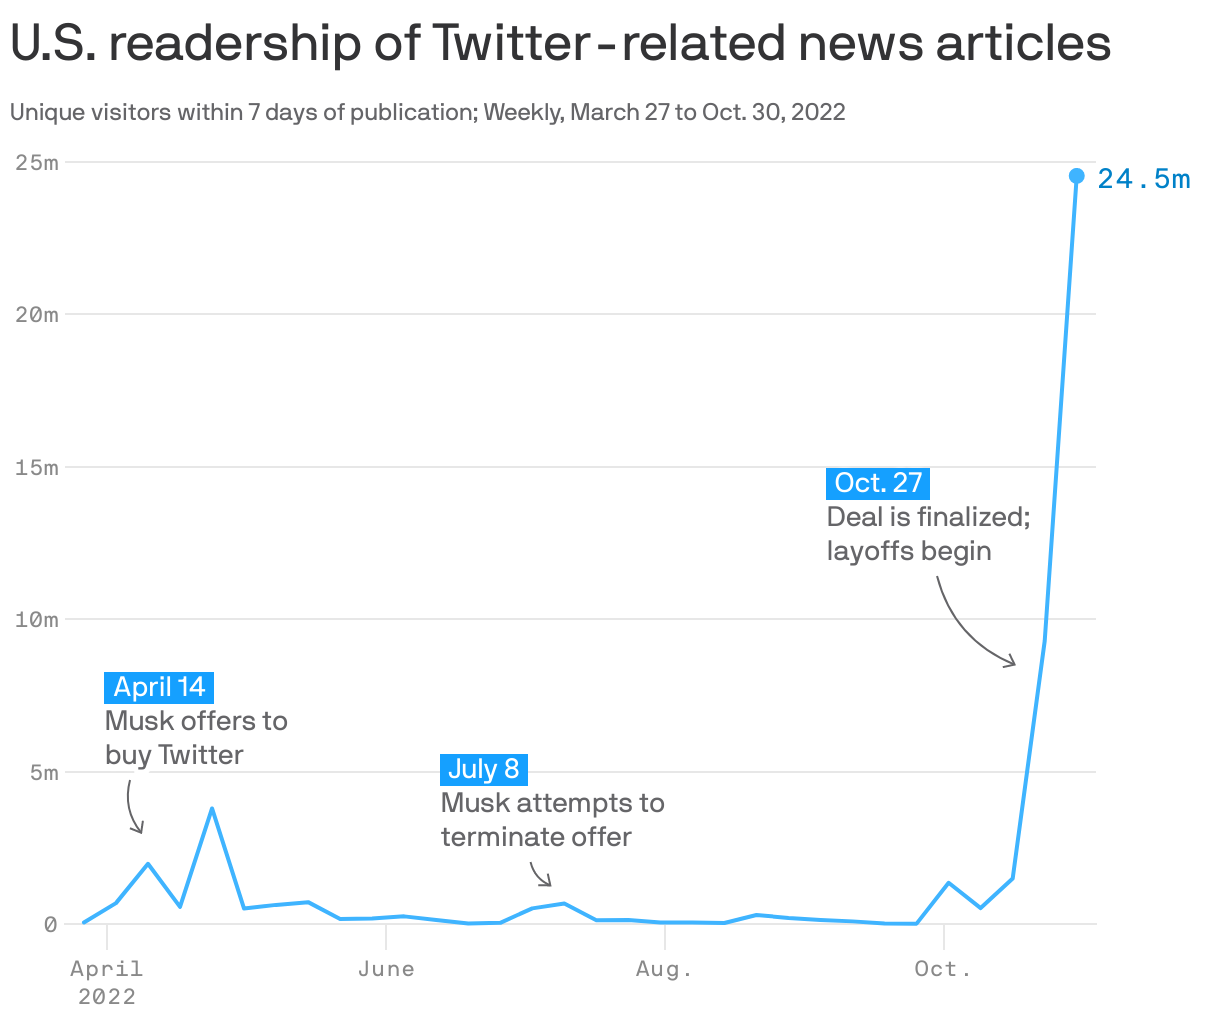 U.S. readership of Twitter-related news articles